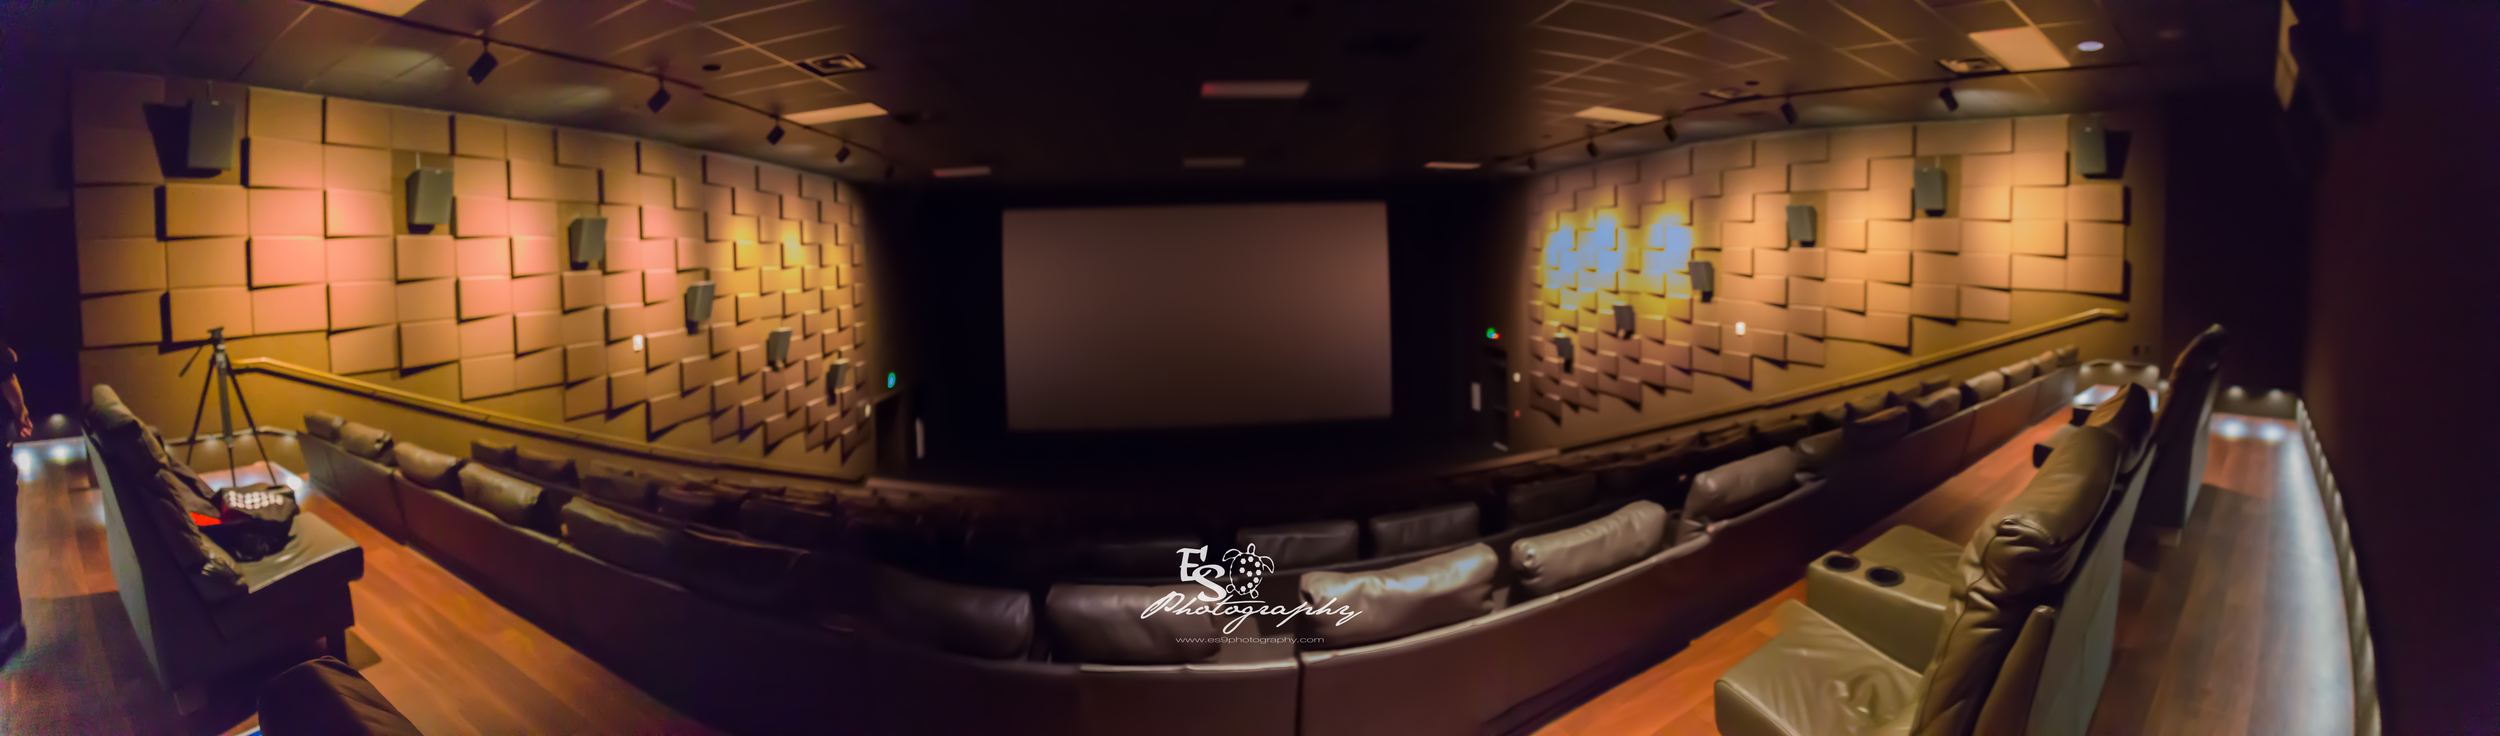 SilverSpot Auditorium 12 Panorama Paradise Reef The World is Watching Documentary Premier @ ES9 Photography 2016.jpg